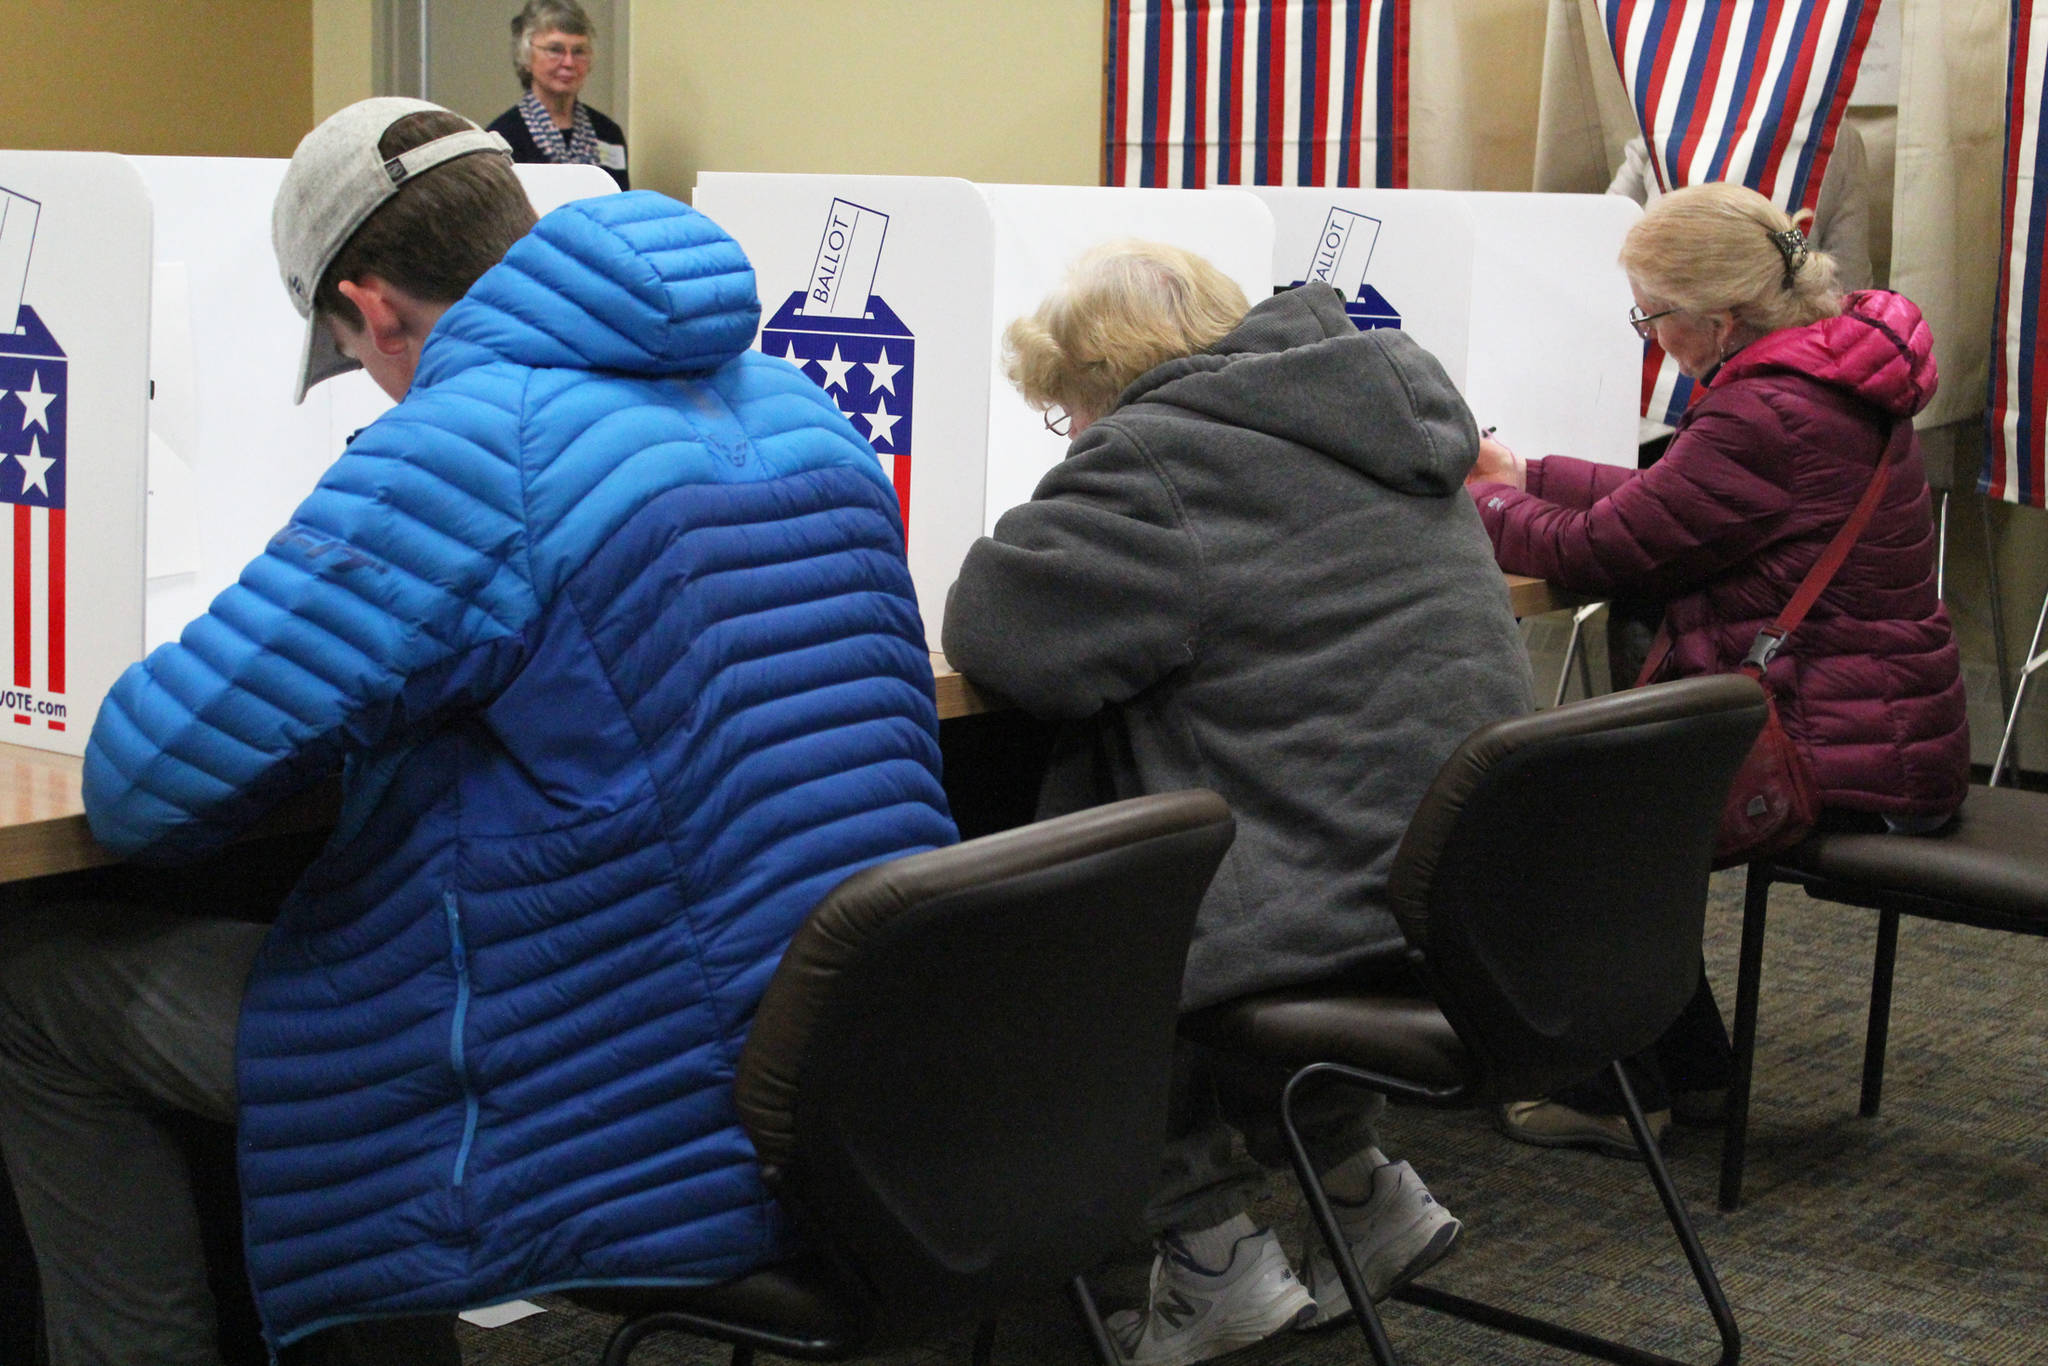 Homer residents cast their votes in the 2018 midterm election Tuesday, Nov. 6, 2018 at Homer City Hall in Homer, Alaska. (Photo by Megan Pacer/Homer News)